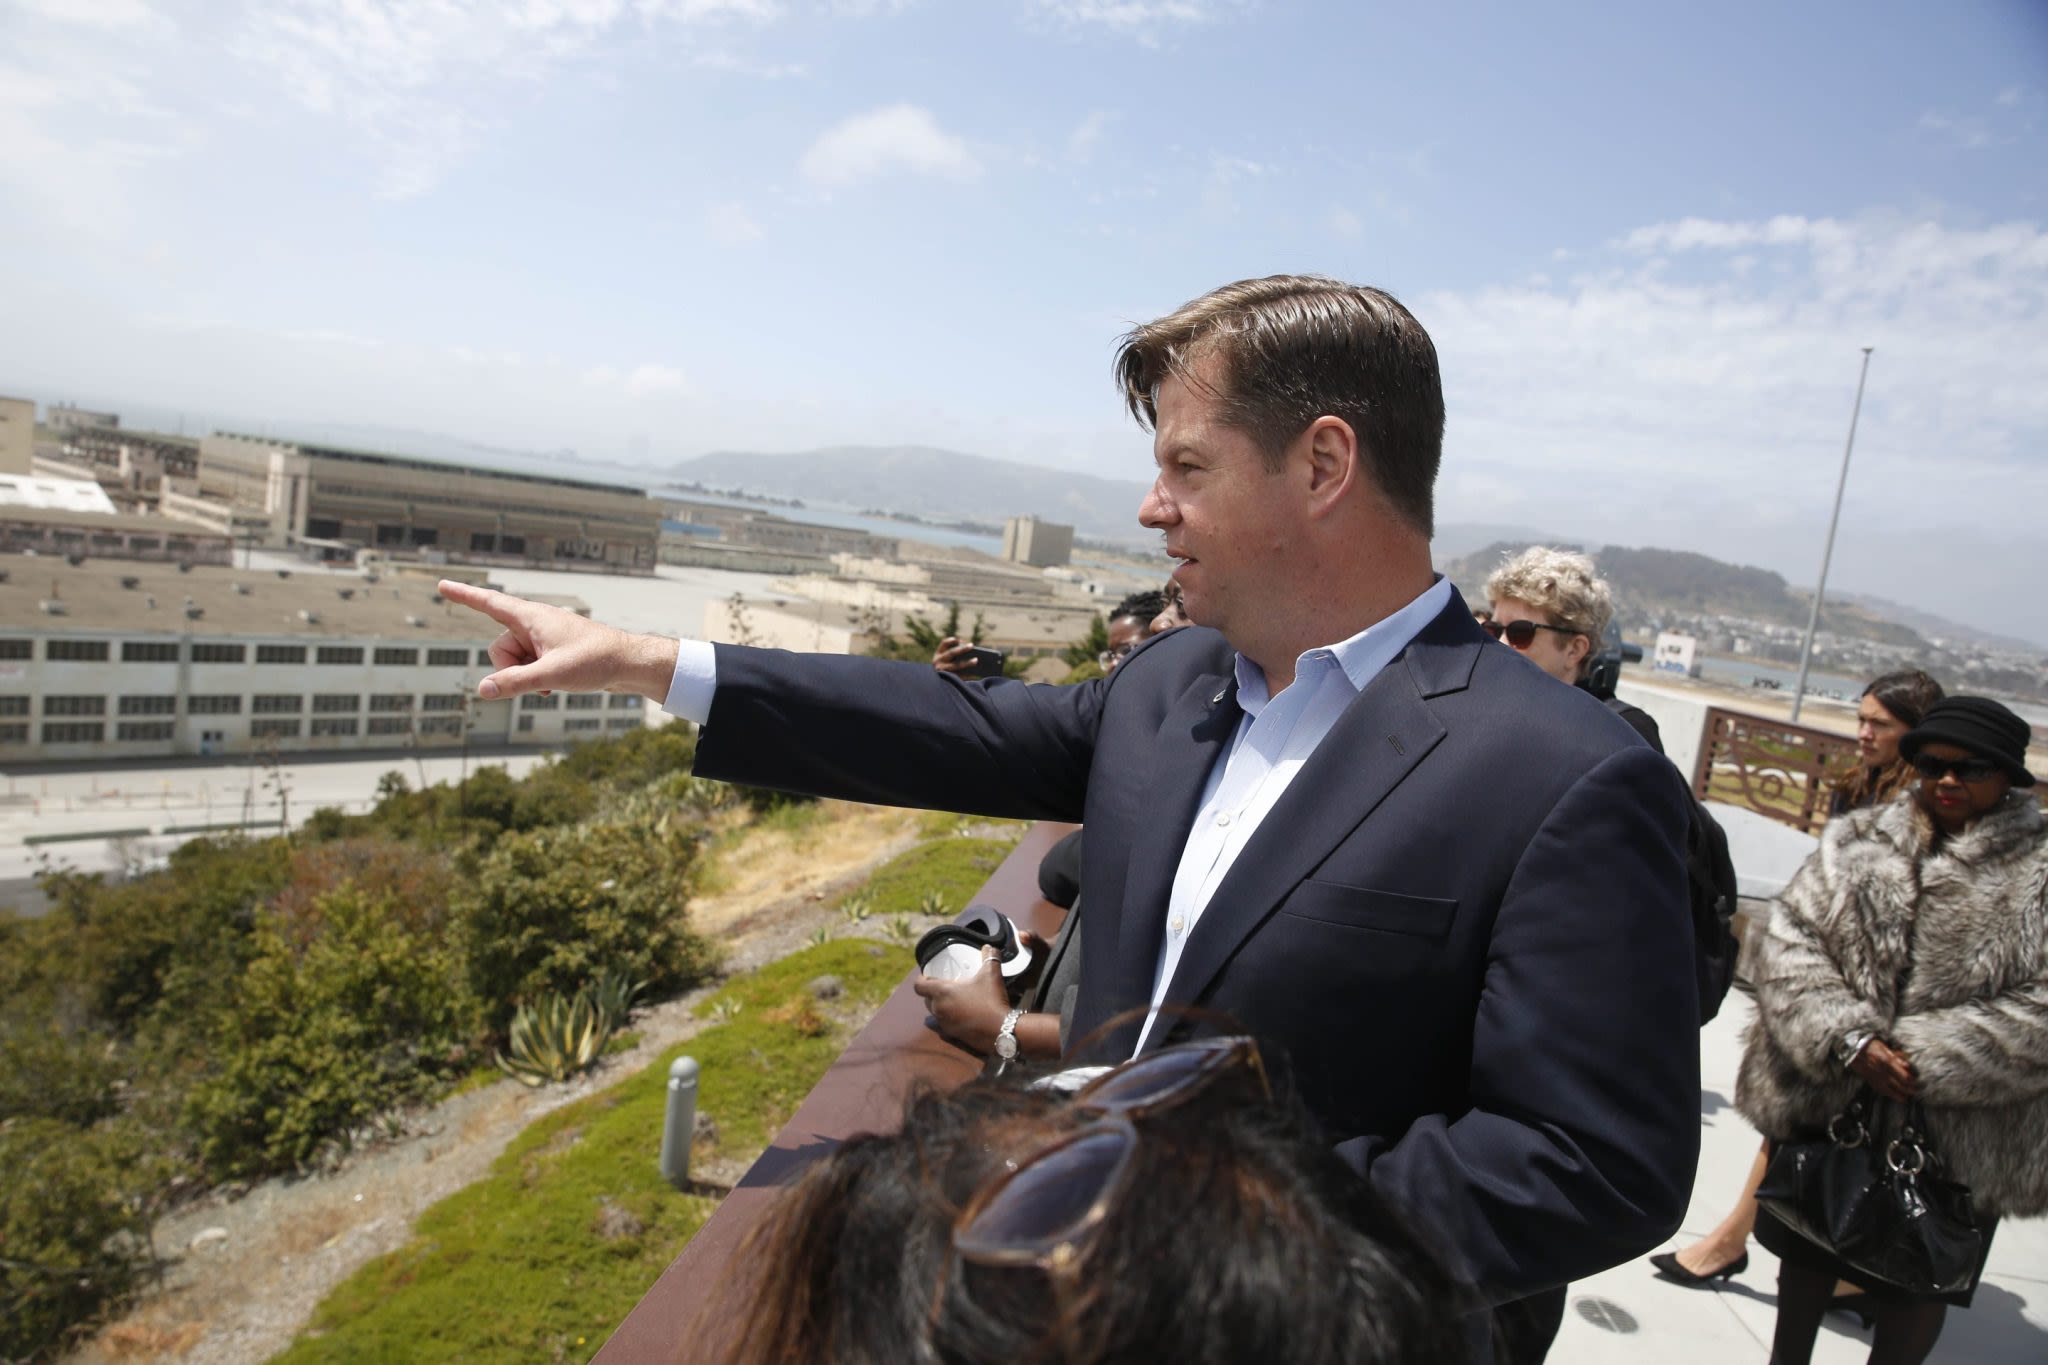 A San Francisco politician has a plan to flip its ‘ghost town’ status—and it involves four days a week in the office